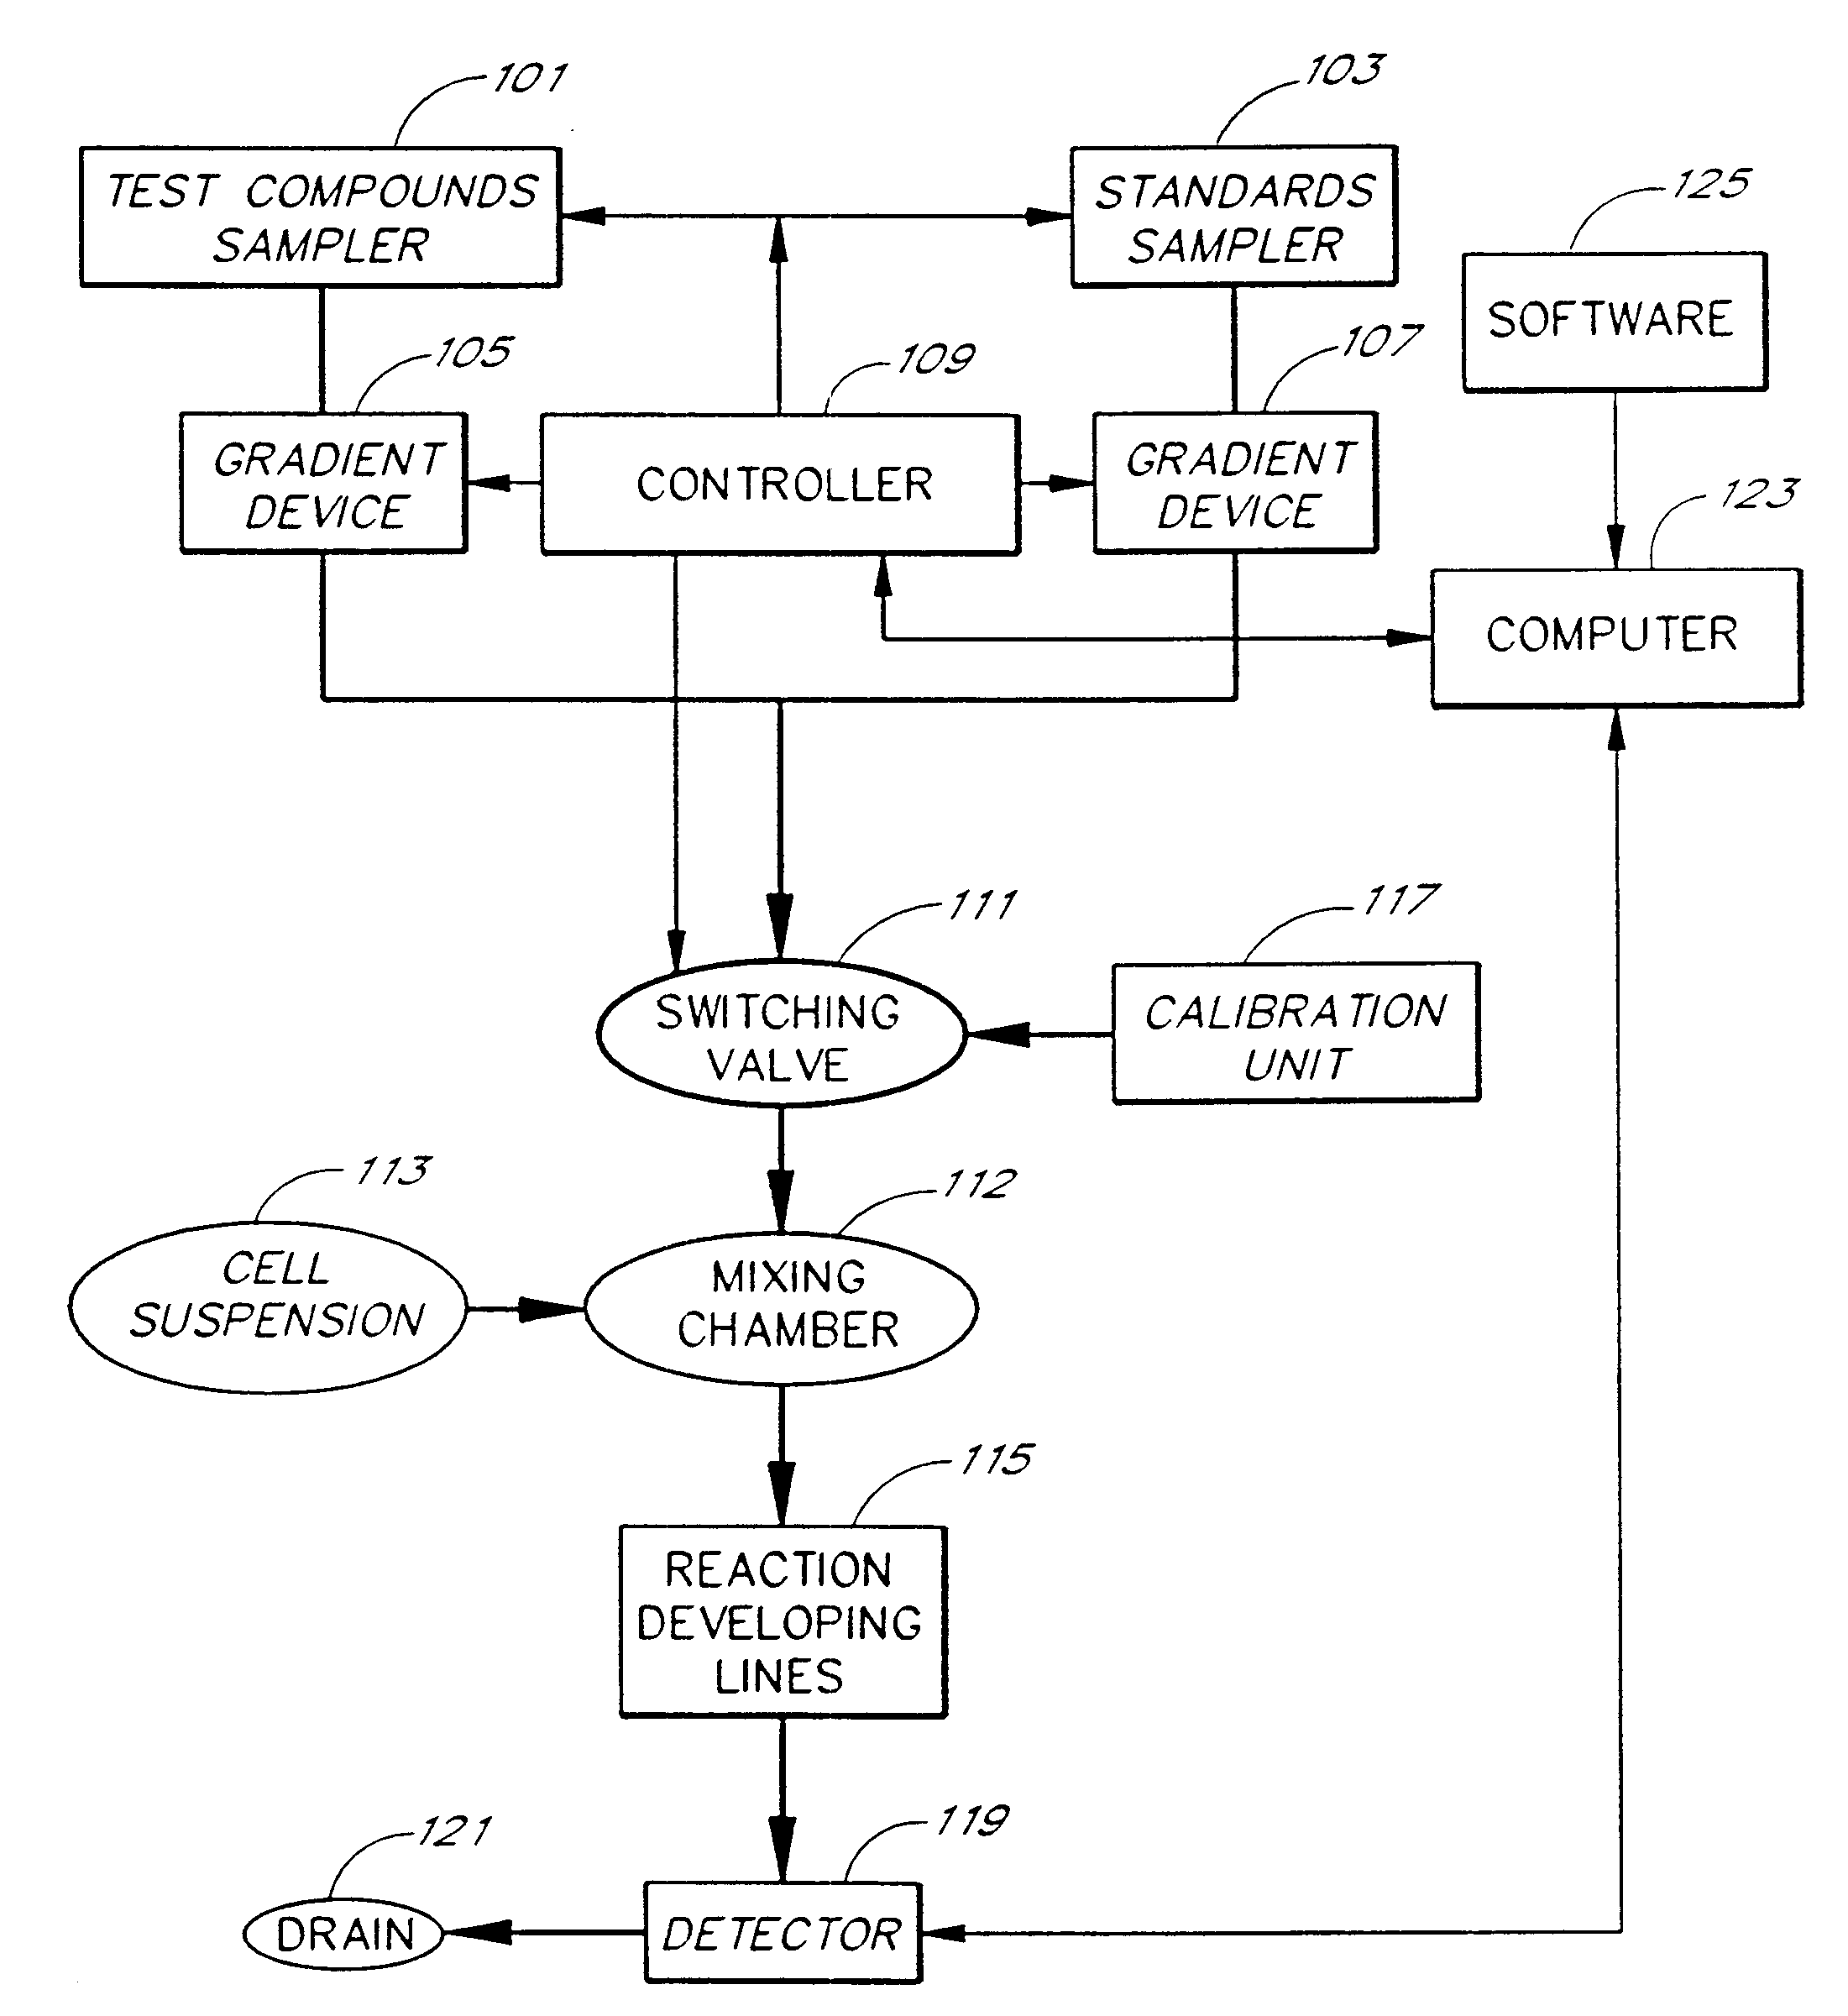 Apparatus and method for real-time measurement of cellular response